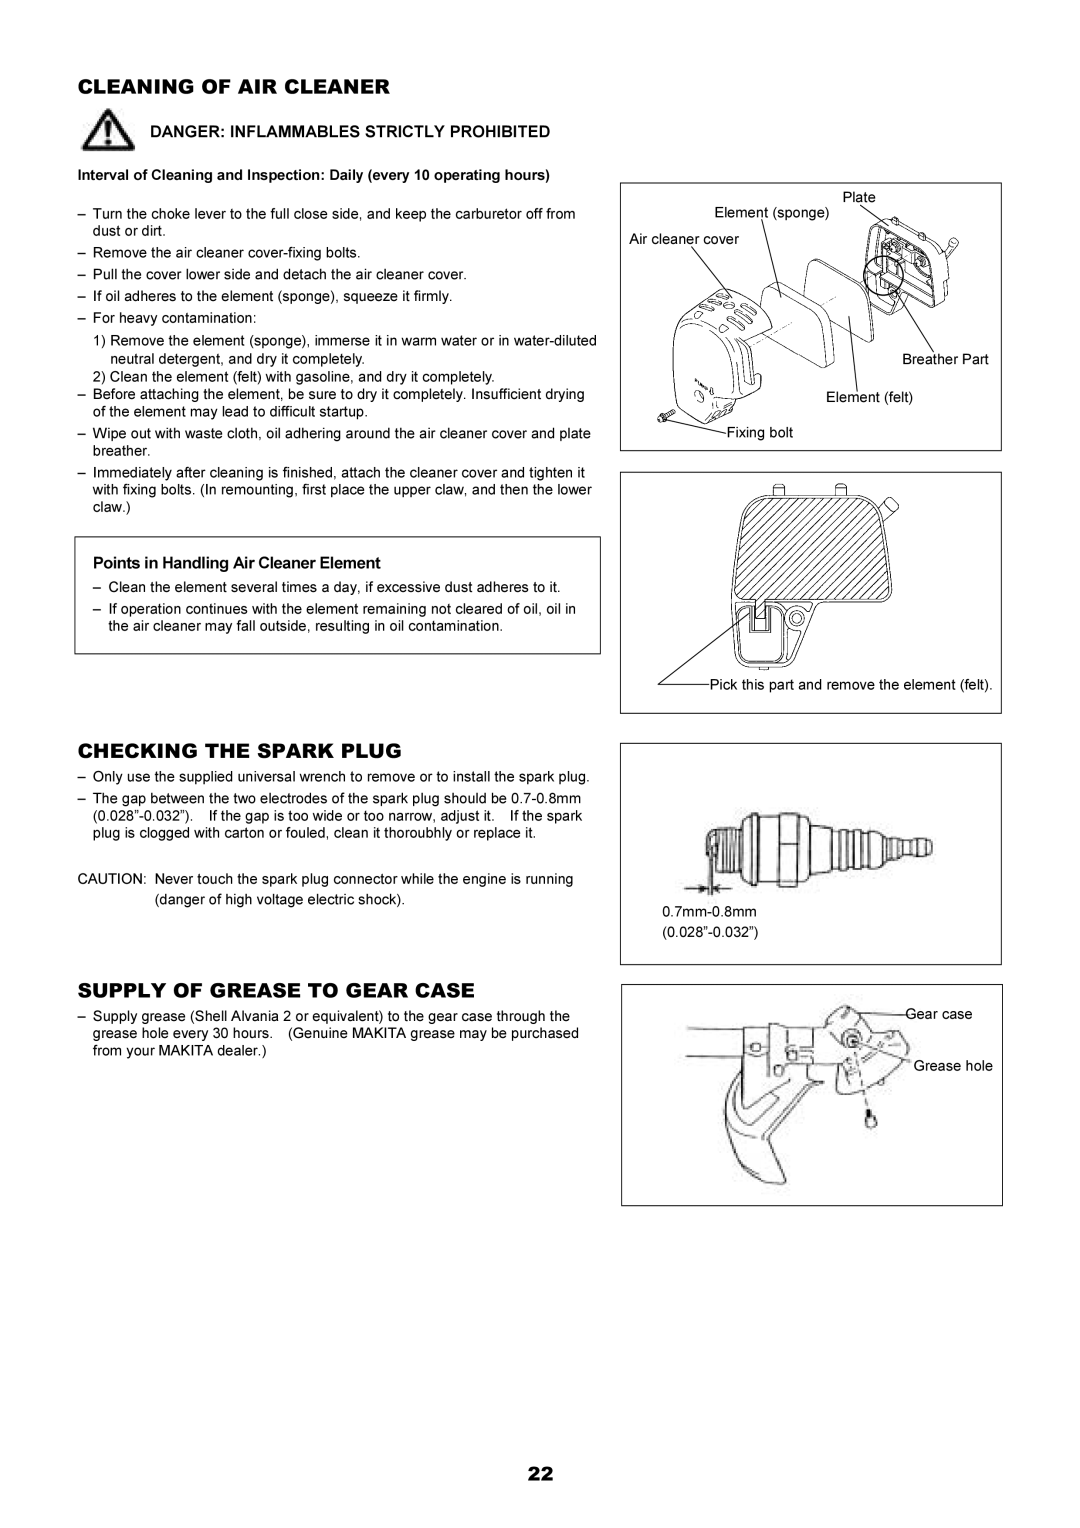 Makita EM4341, EM4340L instruction manual Cleaning Of Air Cleaner, Checking The Spark Plug, Supply Of Grease To Gear Case 